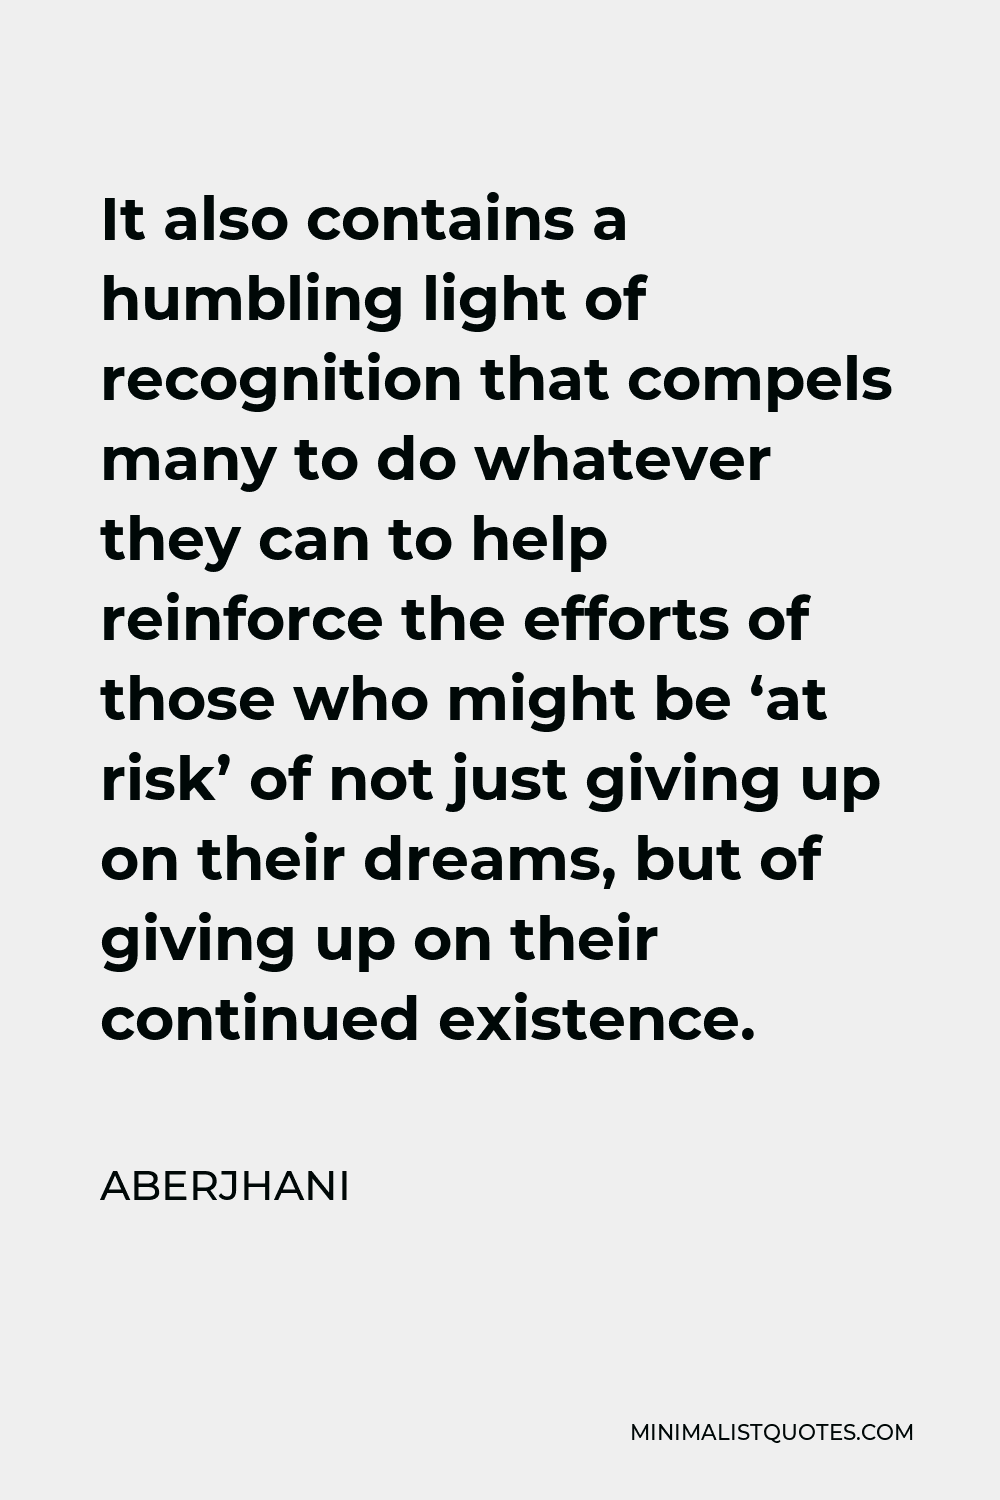 Aberjhani Quote - It also contains a humbling light of recognition that compels many to do whatever they can to help reinforce the efforts of those who might be ‘at risk’ of not just giving up on their dreams, but of giving up on their continued existence.